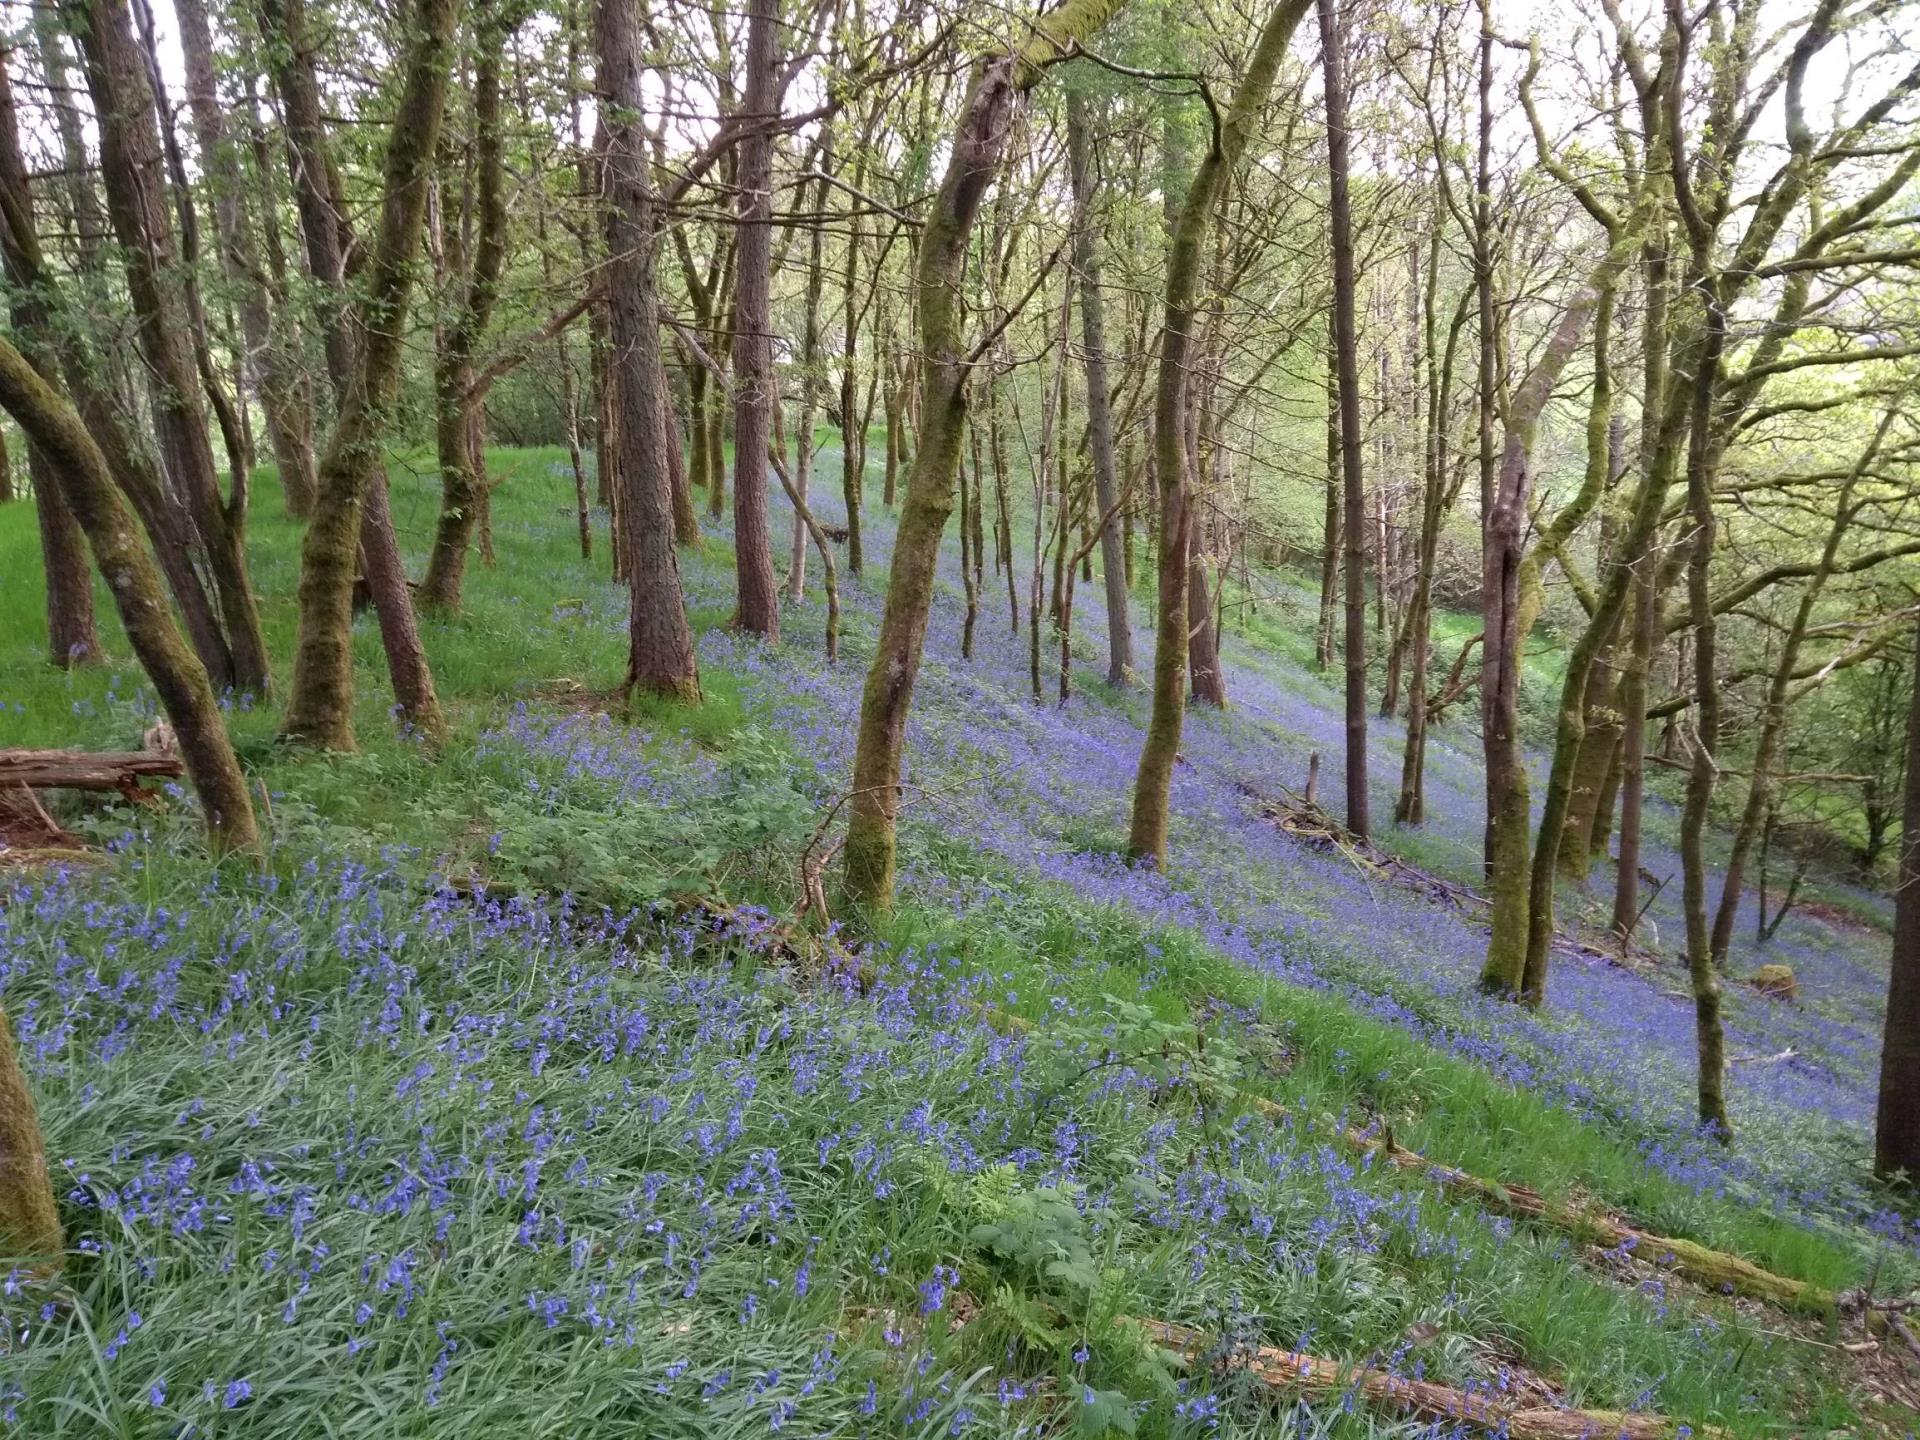 Blissful Bluebells in the Woods!